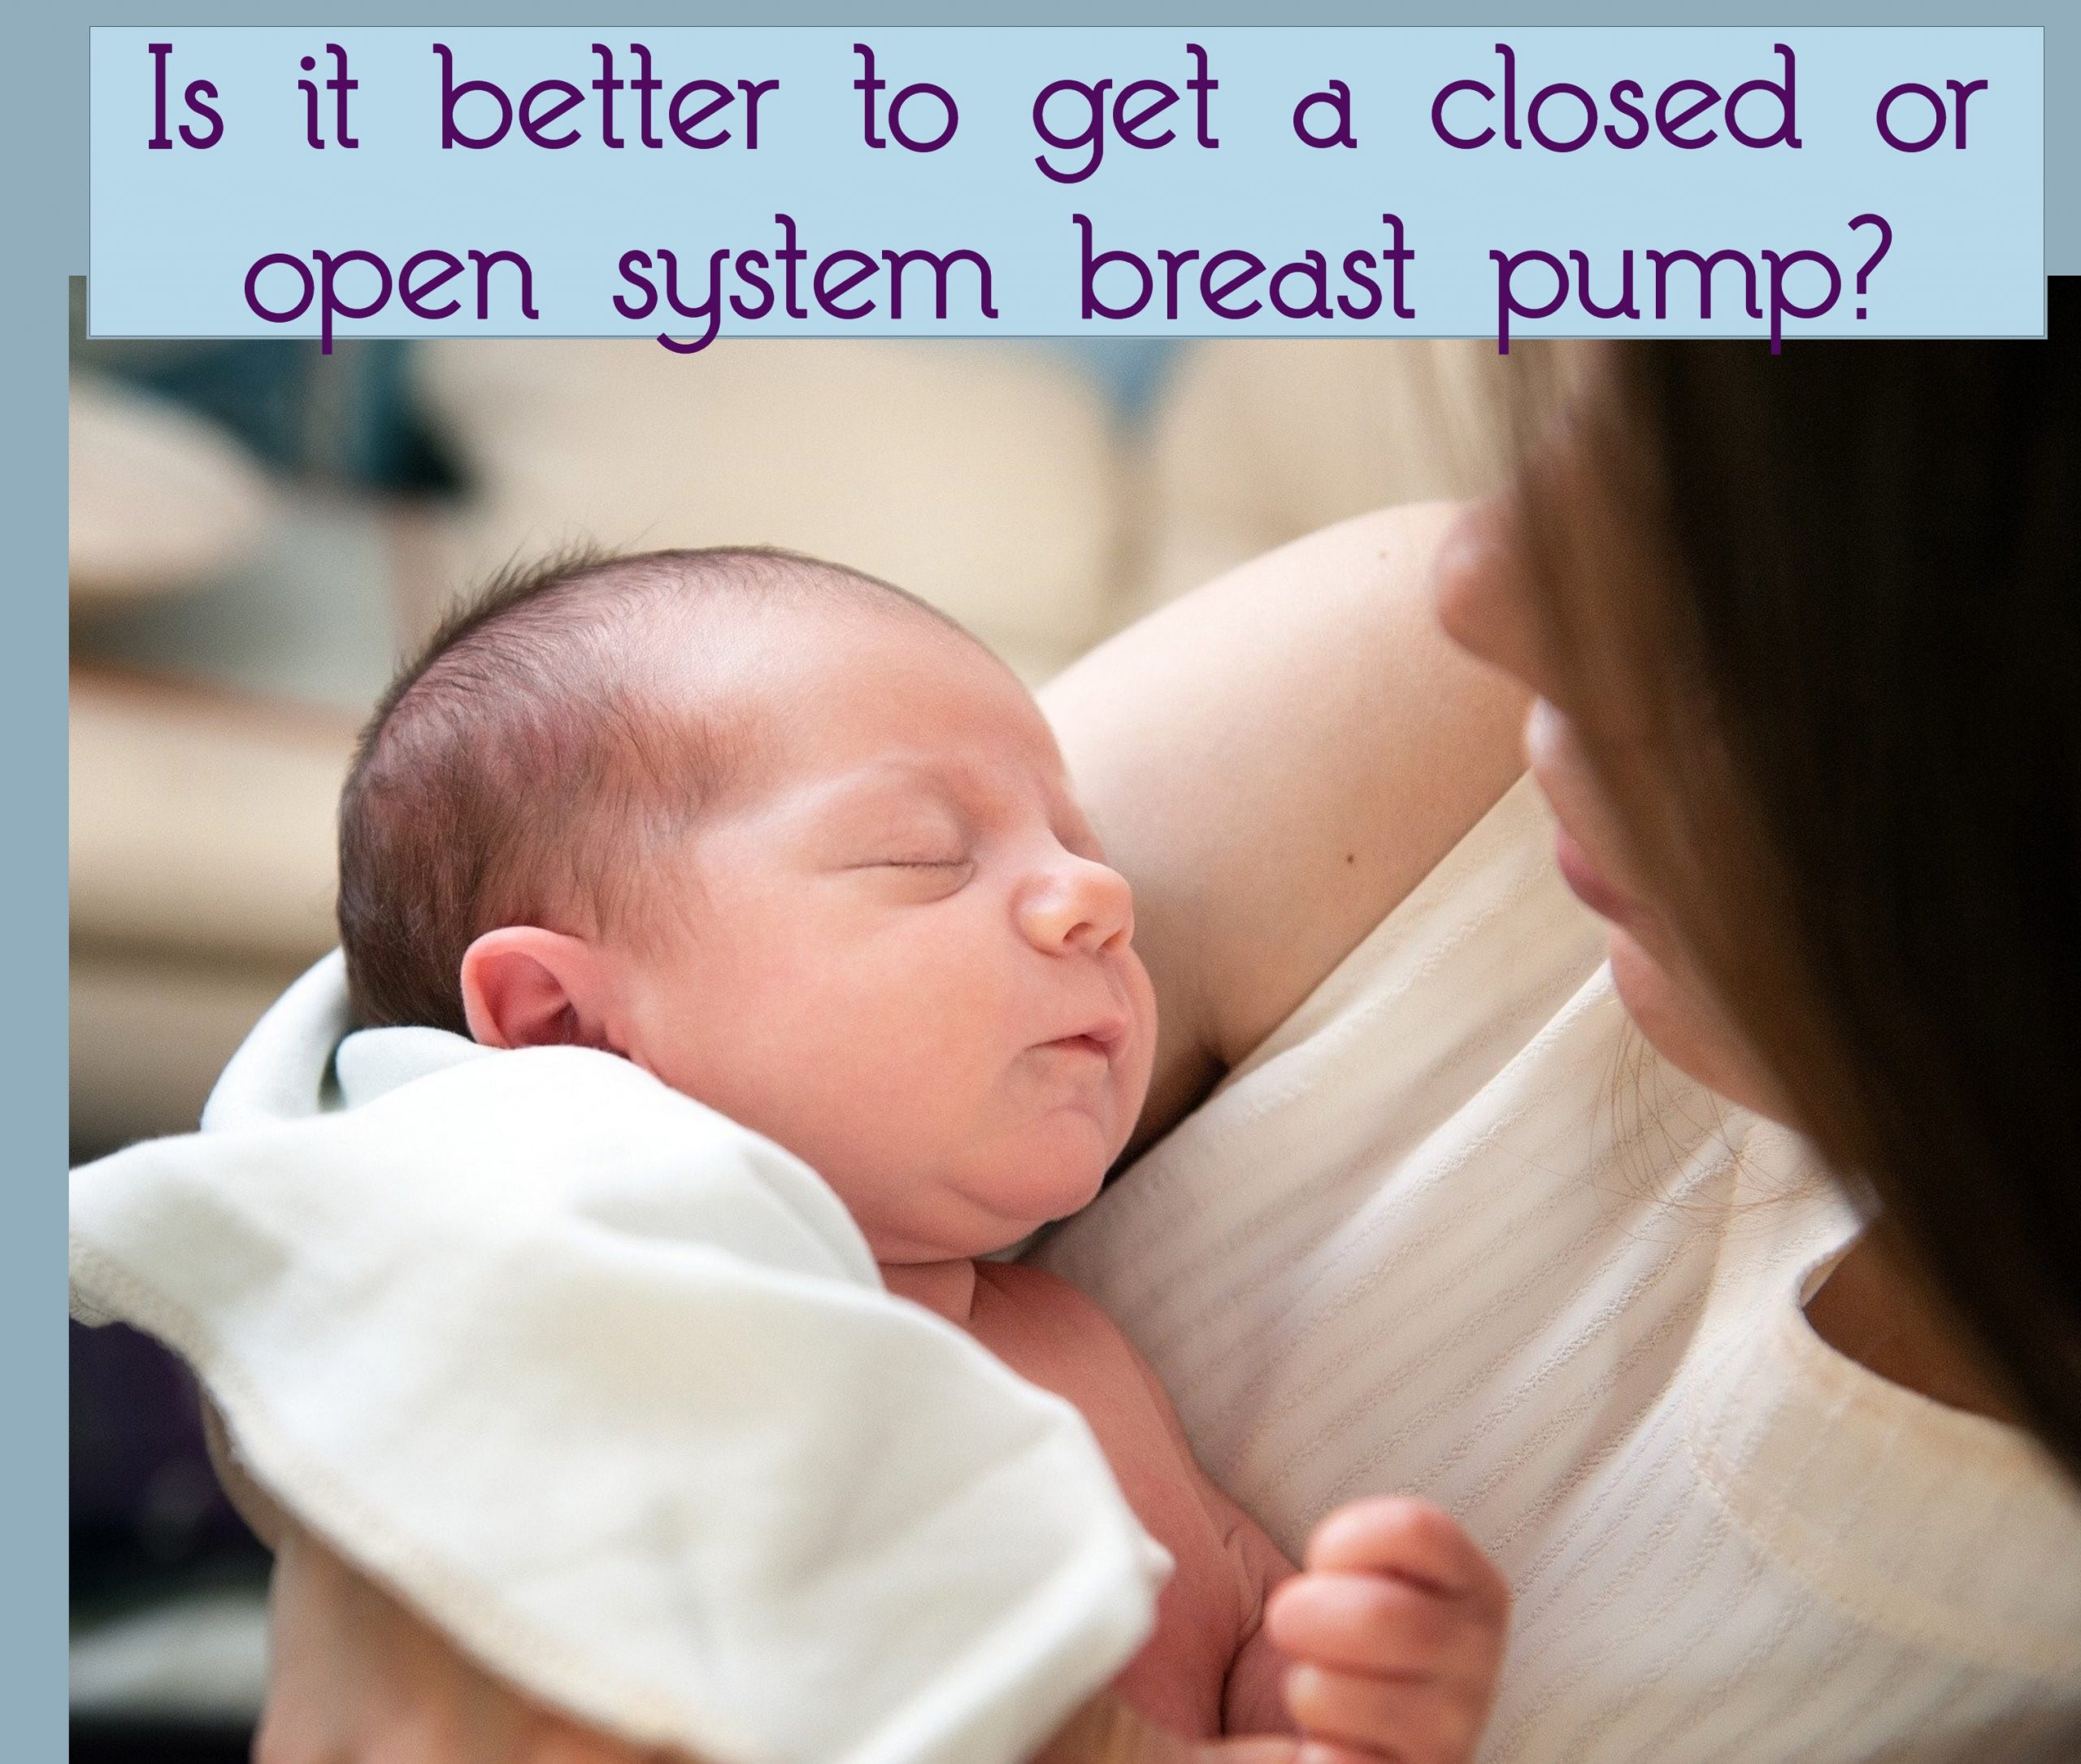 Closed or open system breast pump